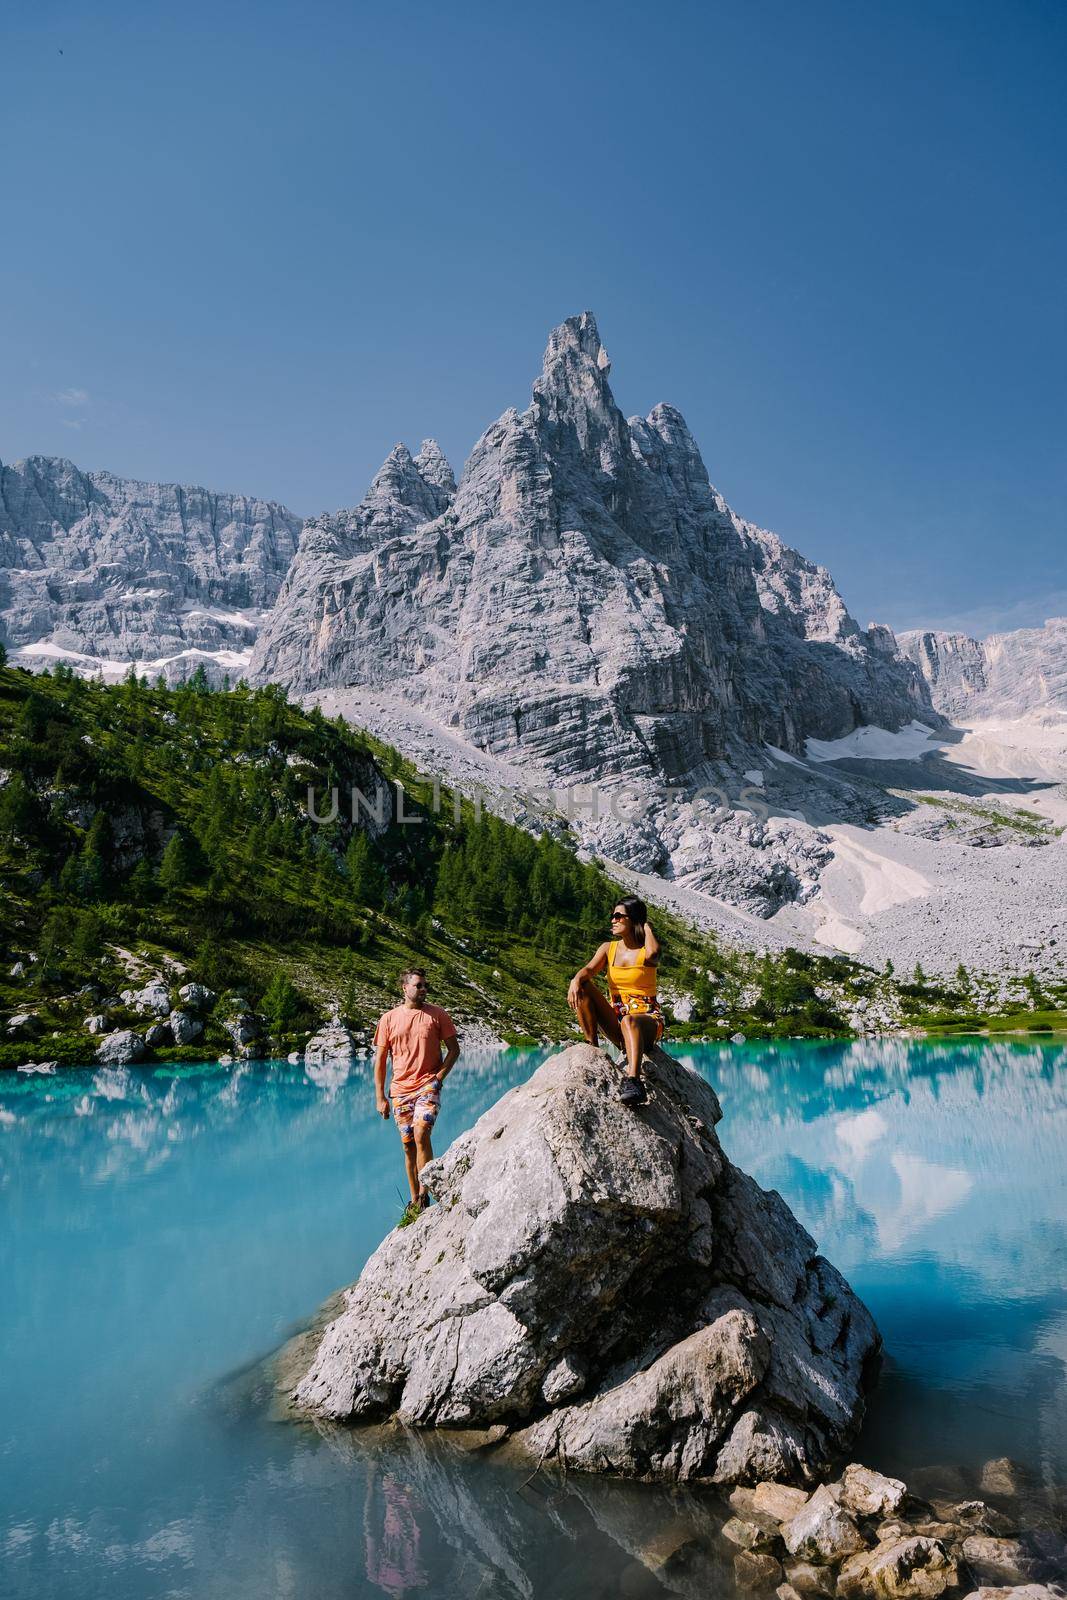 Morning with clear sky on Lago di Sorapis in the Italian Dolomites, milky blue lake Lago di Sorapis, Lake Sorapis, Dolomites, Italy. Couple man and woman mid age walking by the lake in the mountains 